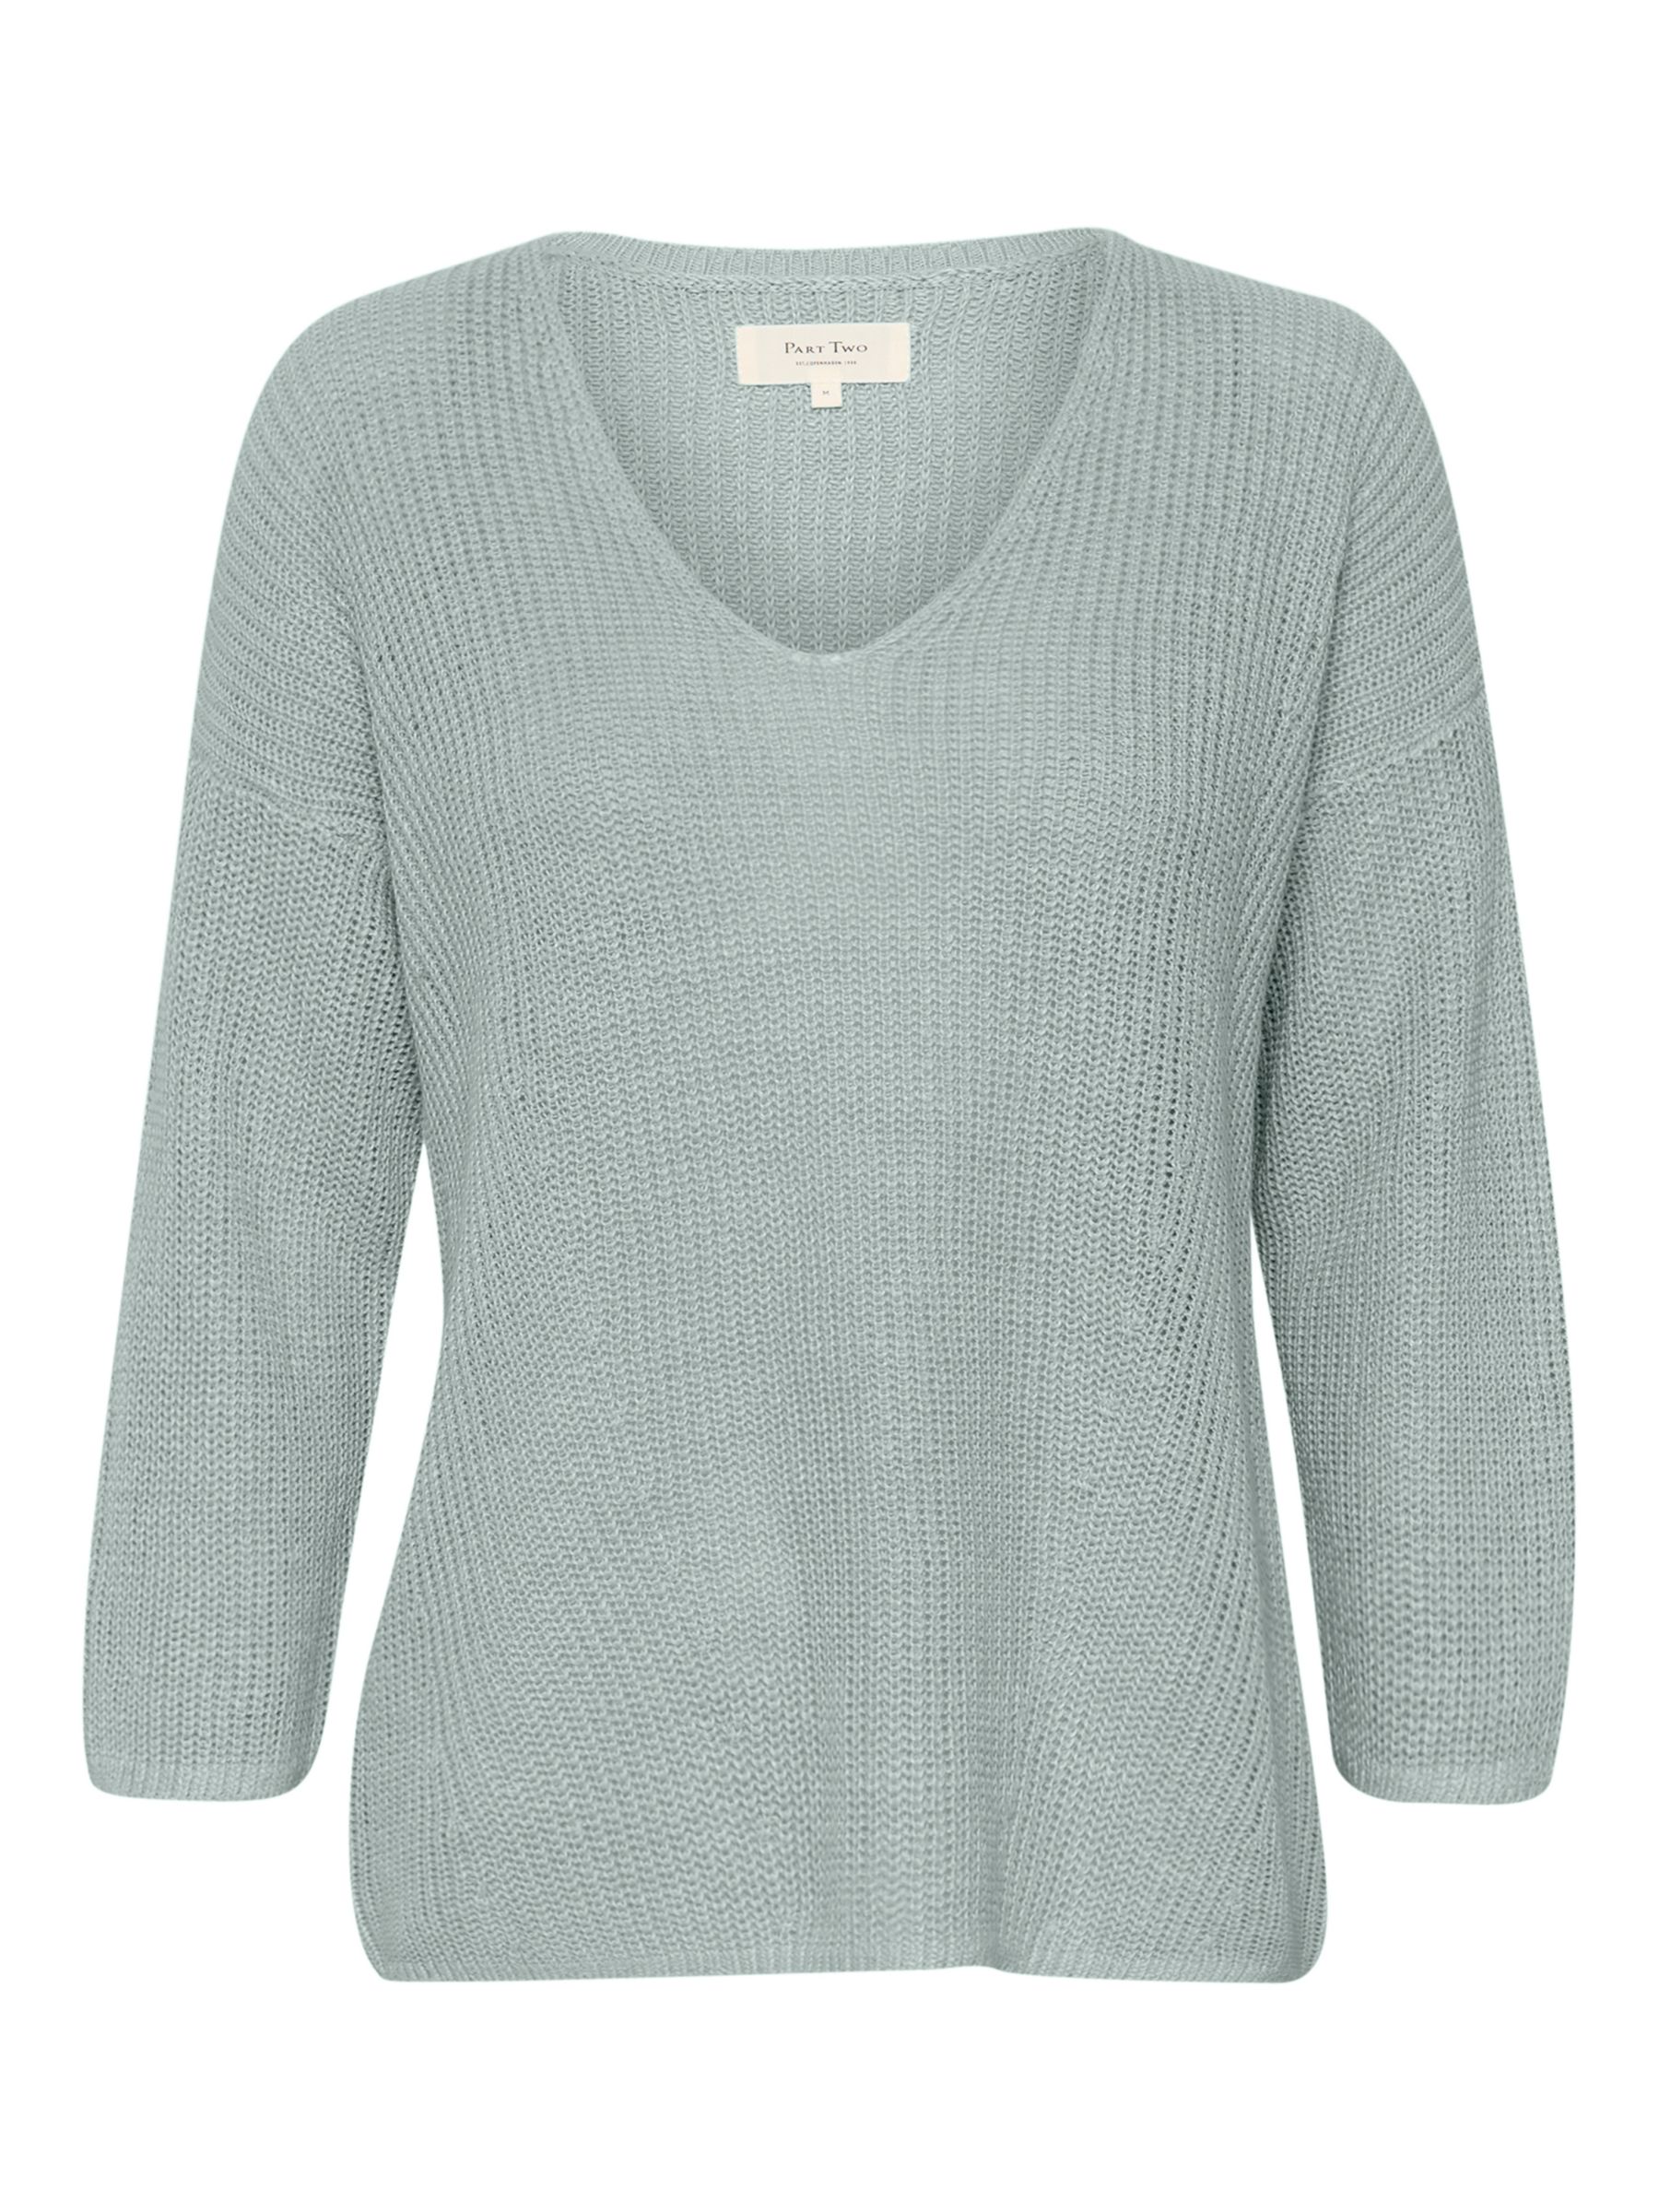 Part Two Etrona Linen Jumper, Ether at John Lewis & Partners